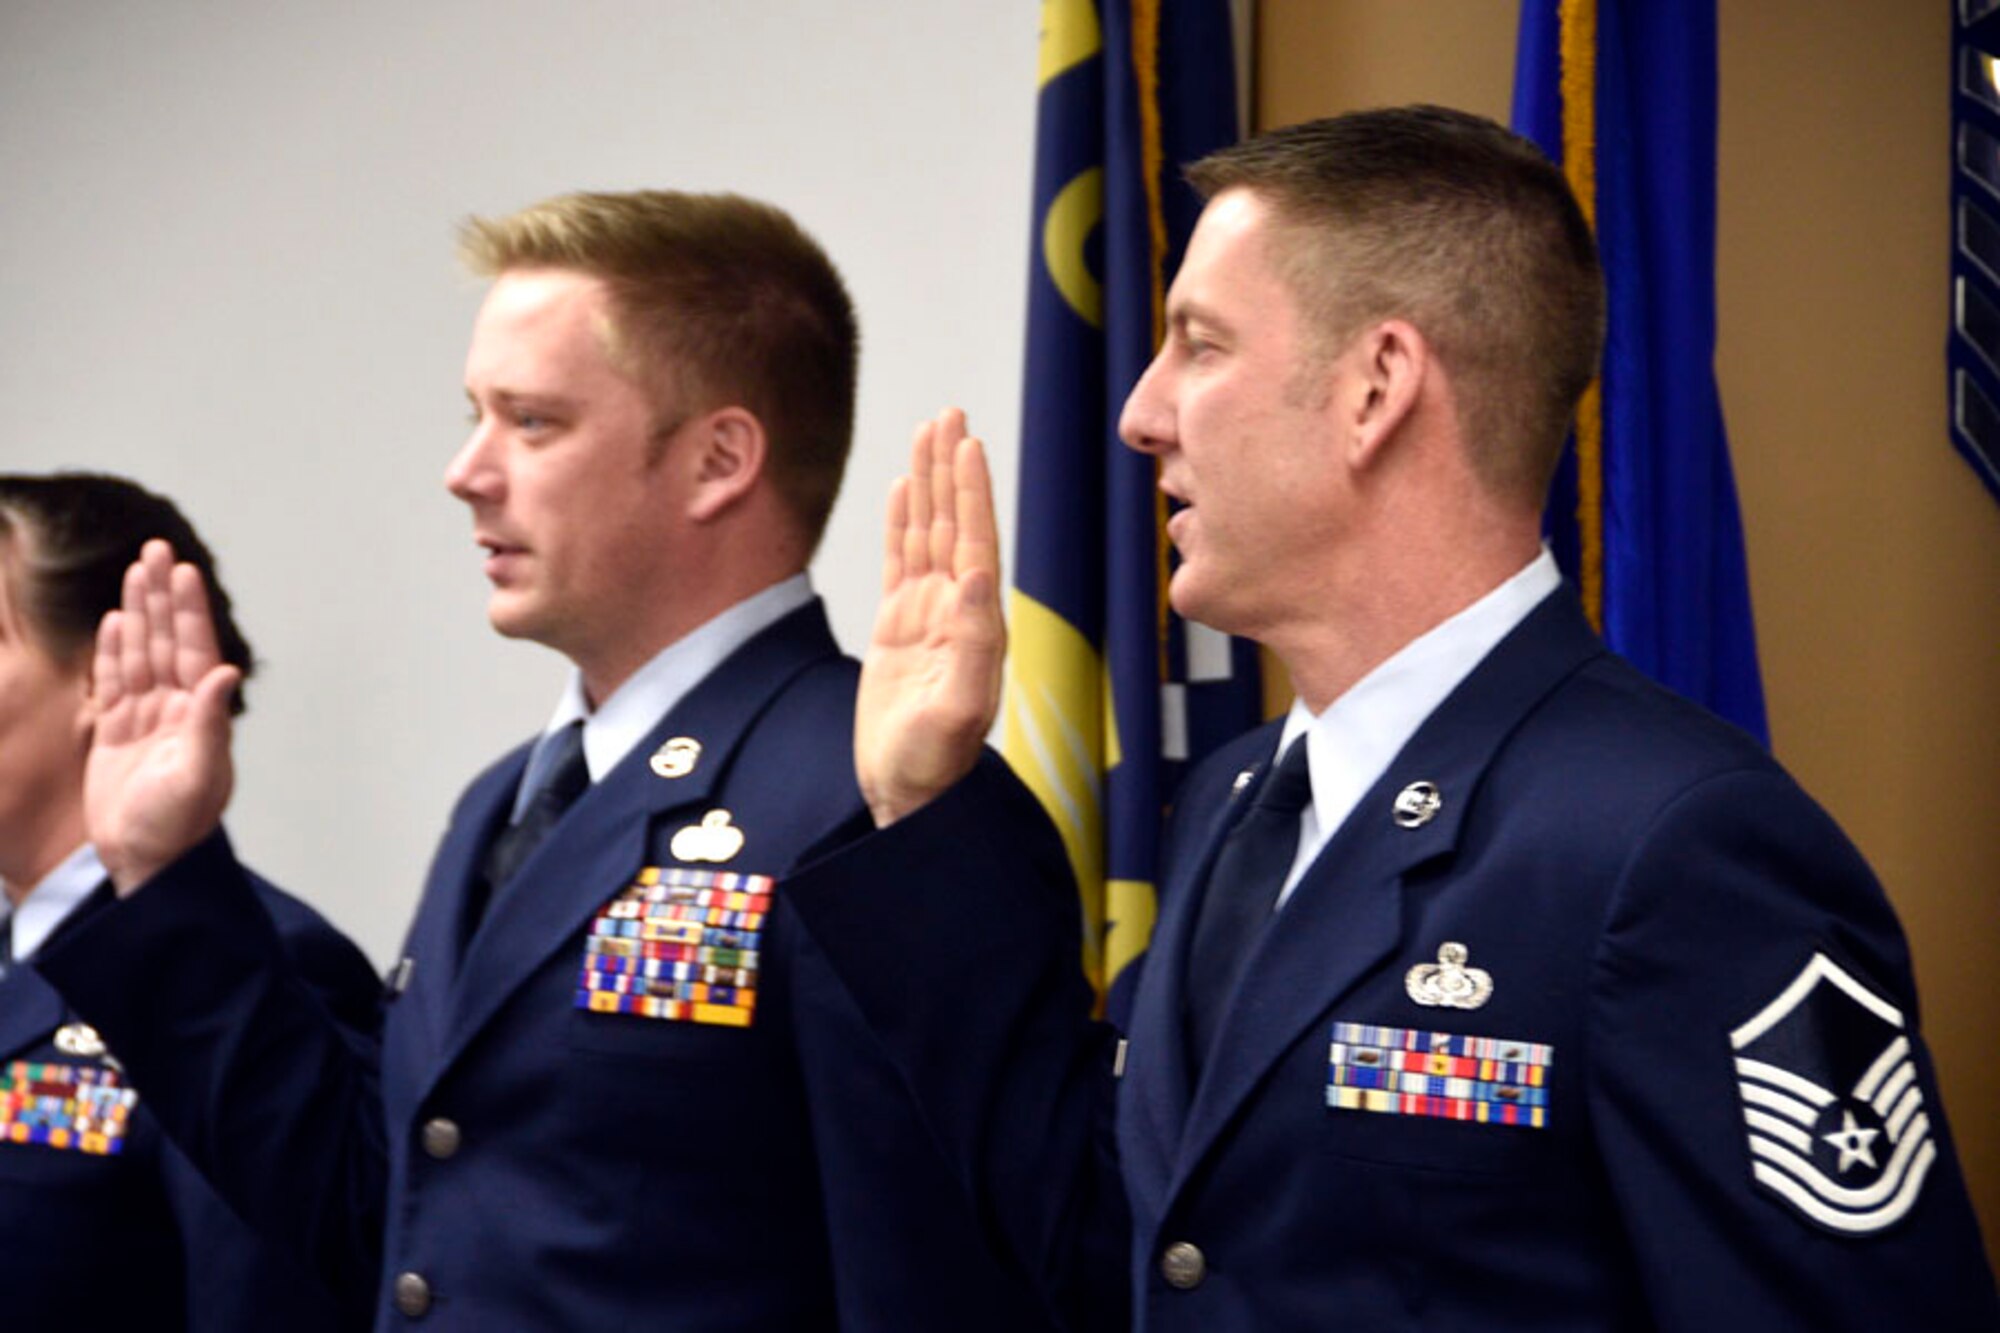 Master Sgts. Sean Keighley and Anthony Renenger take the oath during the Senior NCO Induction Ceremony held at the 120th Airlift Wing in Great Falls, Mont. Dec. 4, 2016. (U.S. Air National Guard photo/Senior Master Sgt. Eric Peterson)